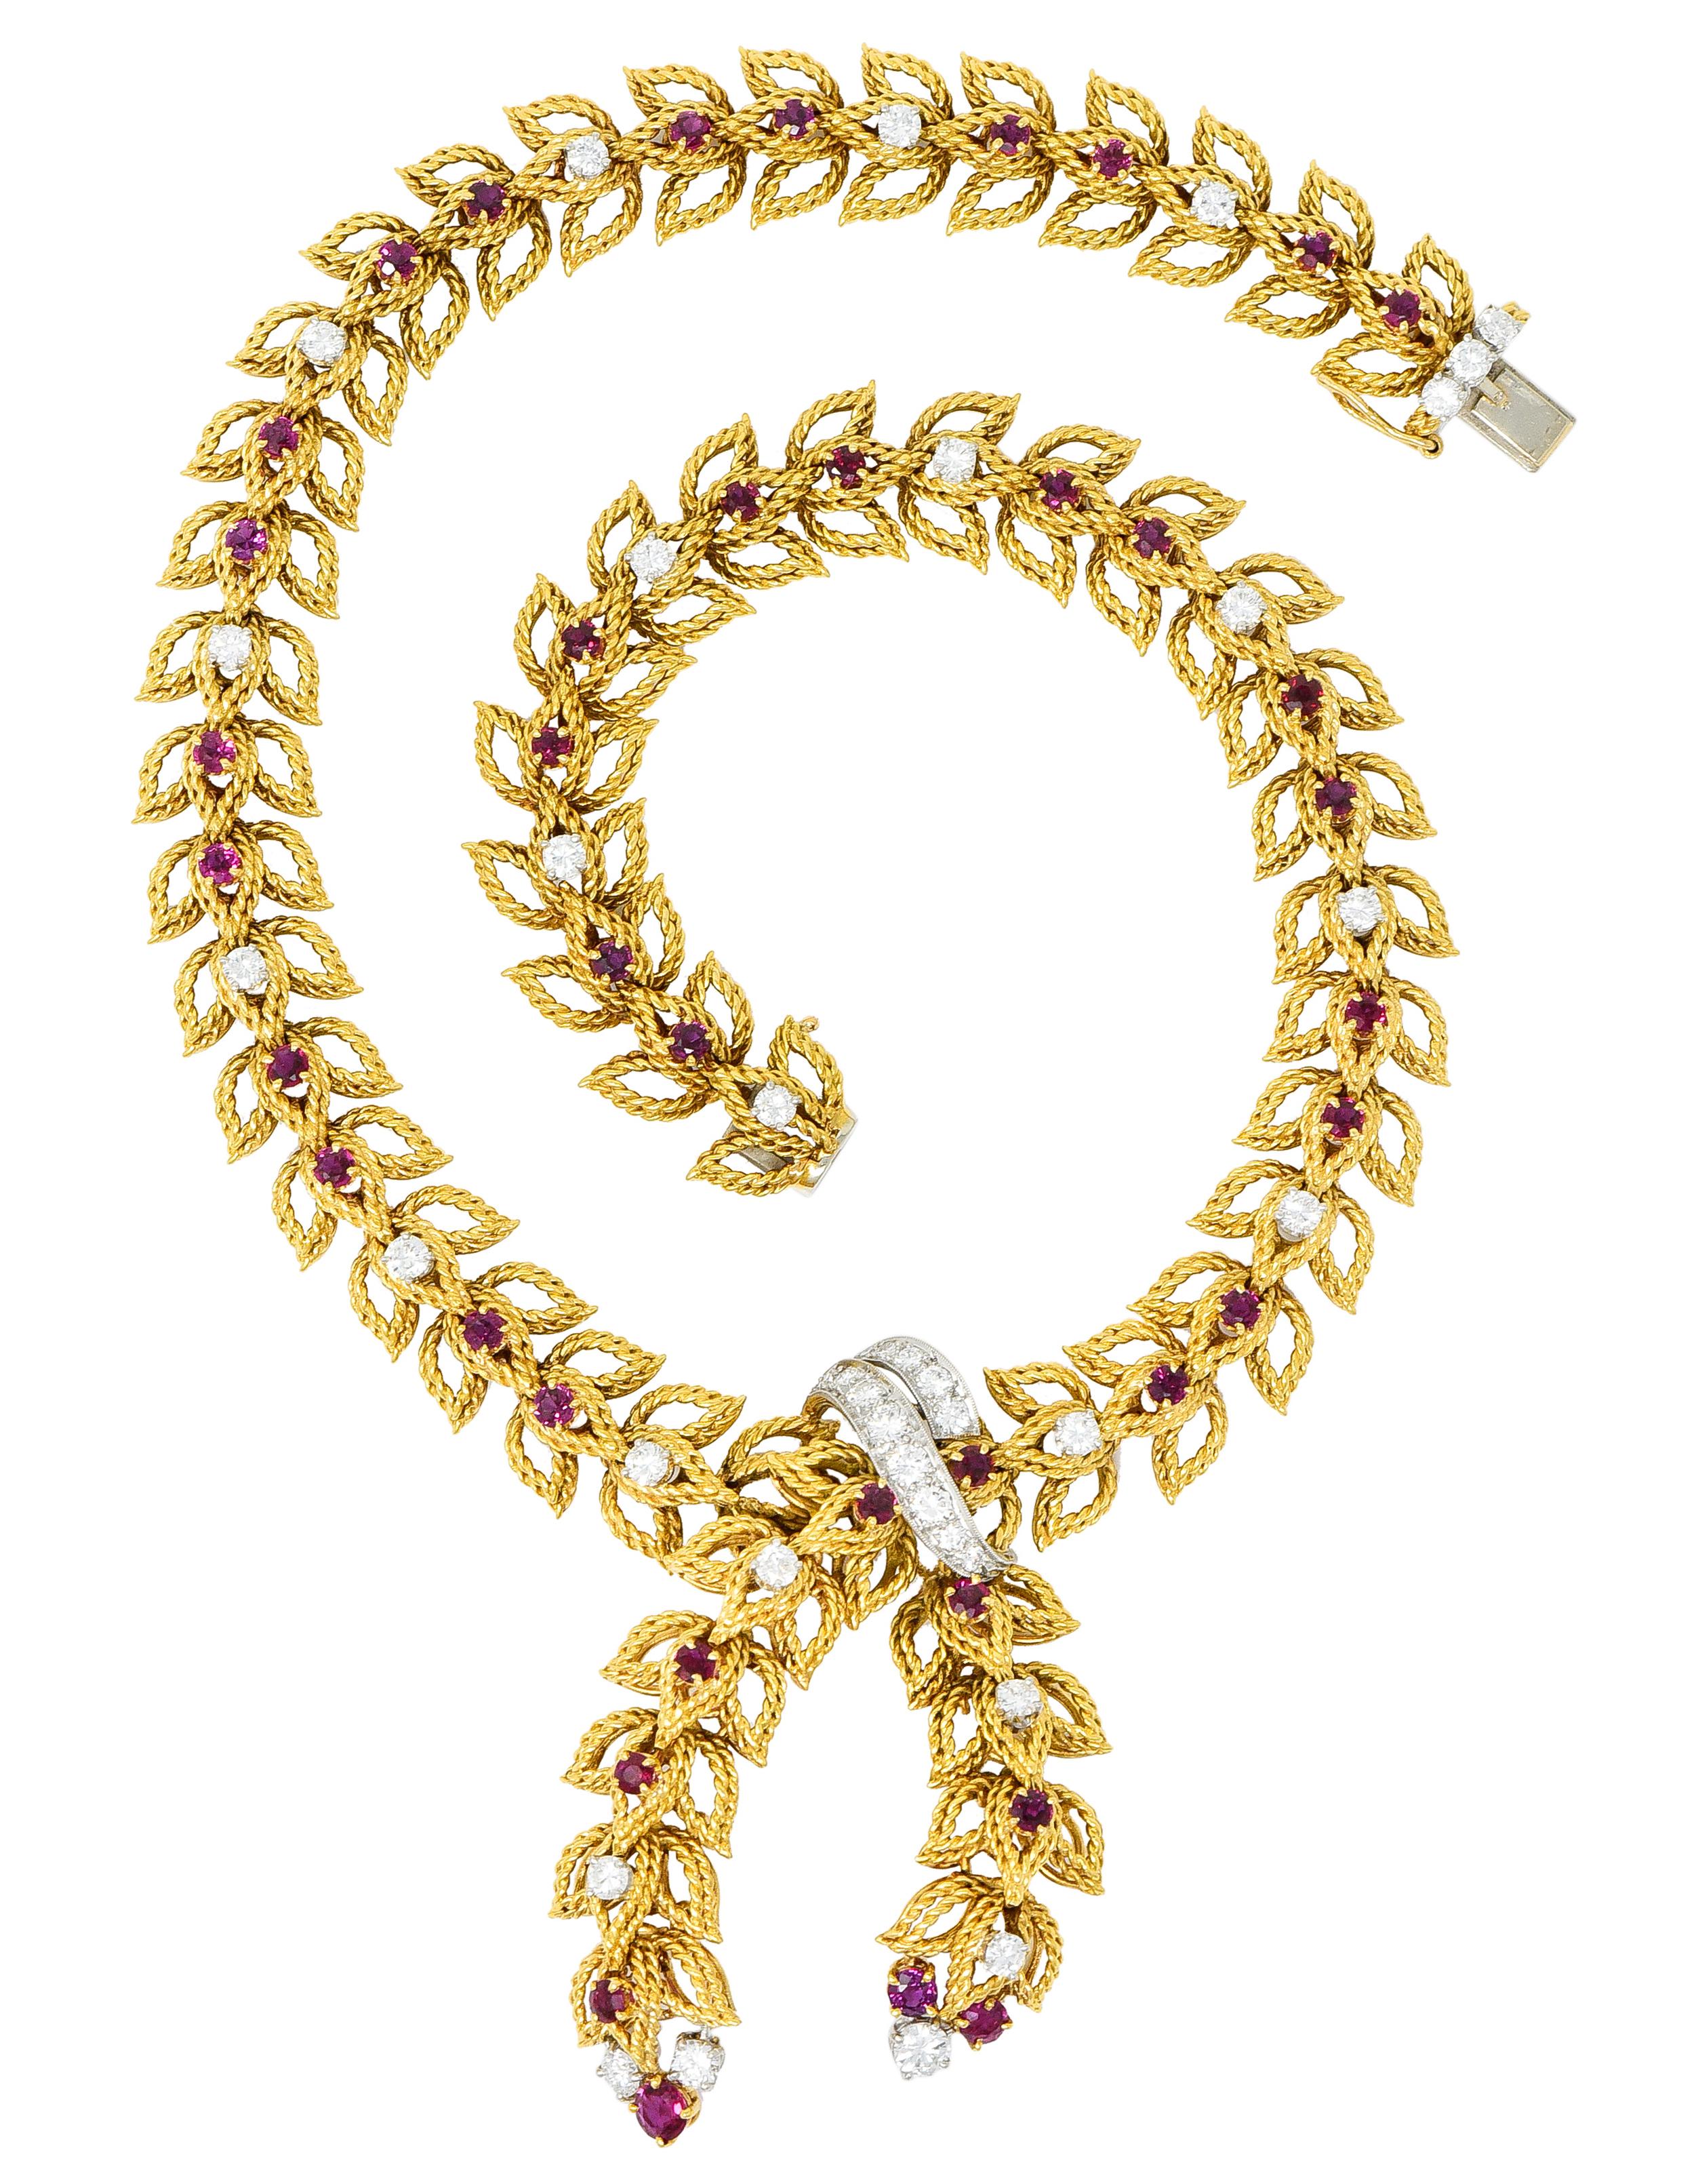 Lariat style collar necklace comprised of foliate links designed as three pointed leaves of twisted gold

Foliate linkage overlaps at center, secured by a sweeping platinum station, as articulated foliate drops

Accented throughout by round cut